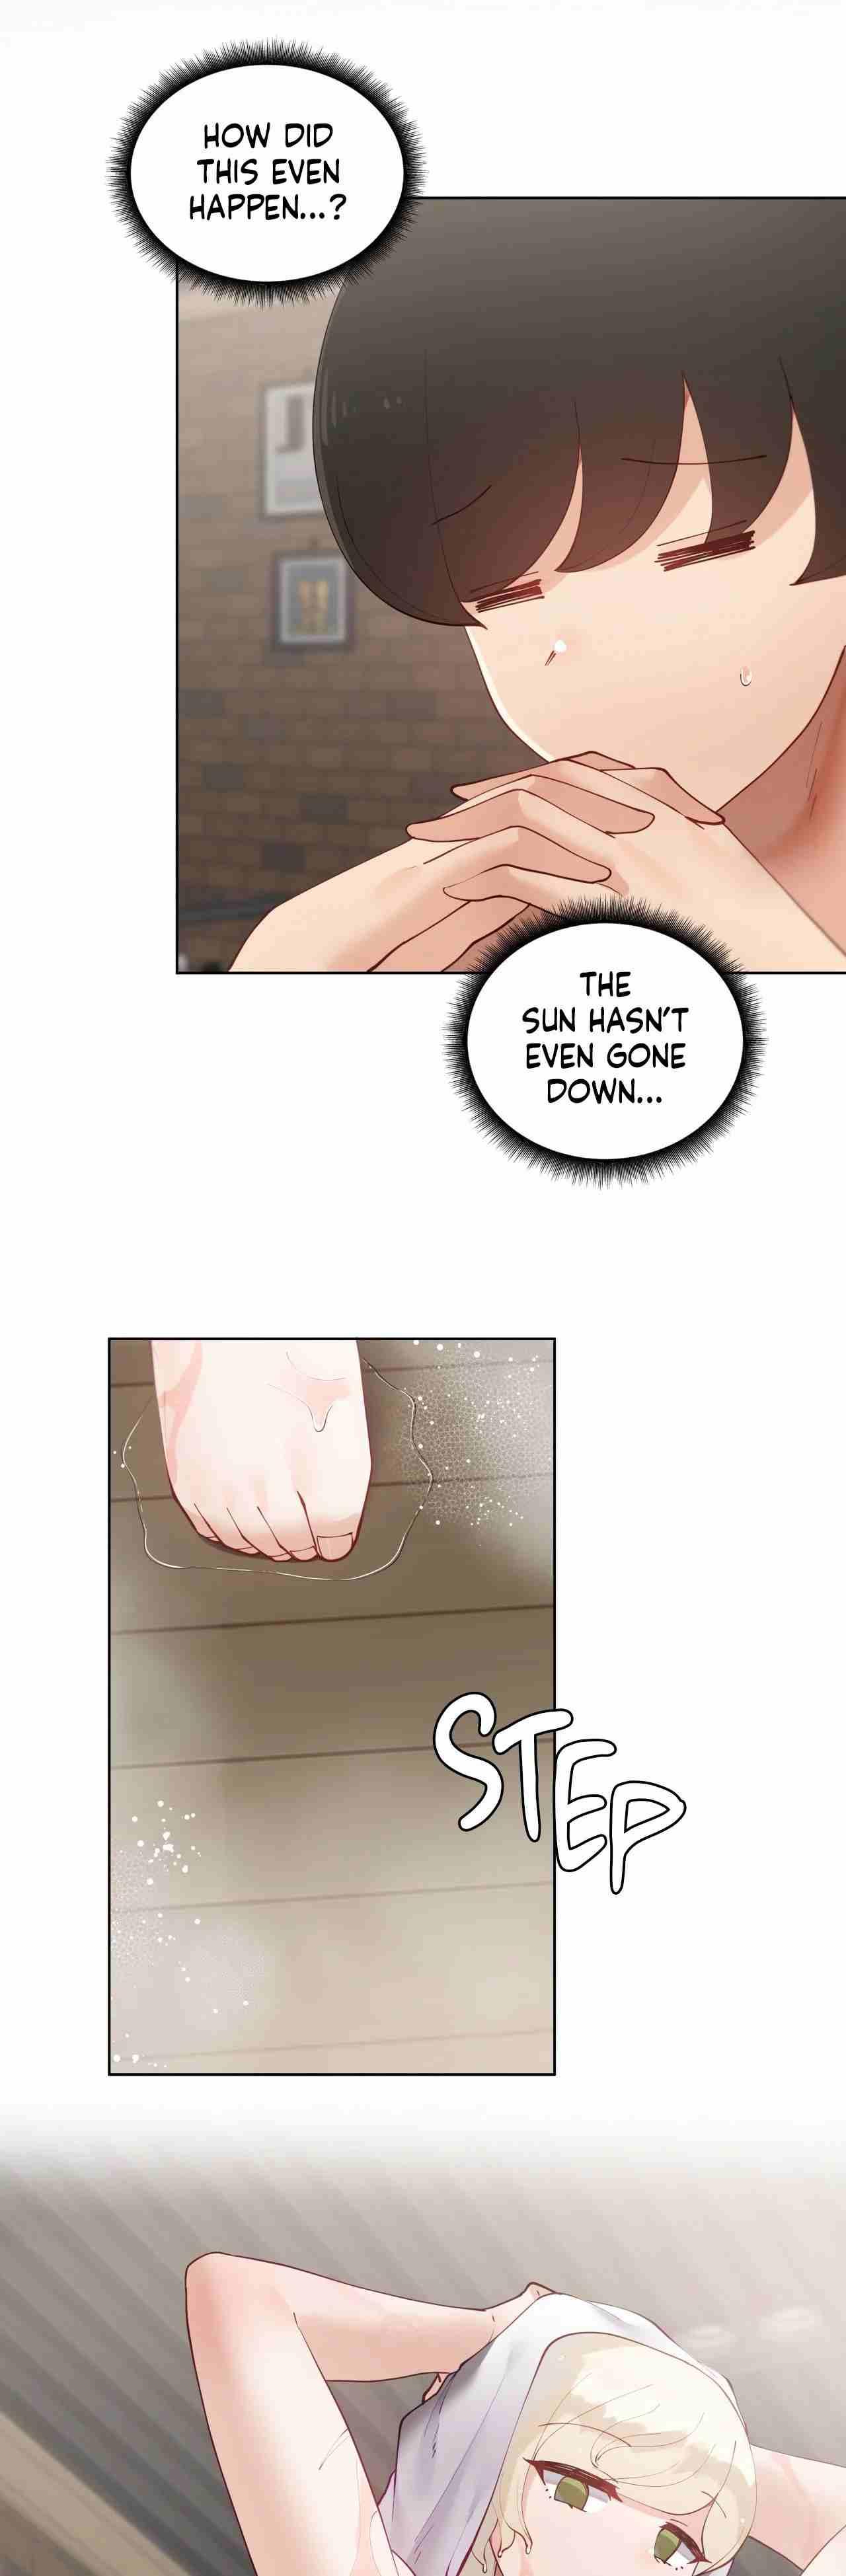 Amature Porn [Over.J, Choi Tae-young] Learning the Hard Way 2nd Season (After Story) Ch.1/? [English] [Manhwa PDF] Ongoing 8teenxxx - Picture 3